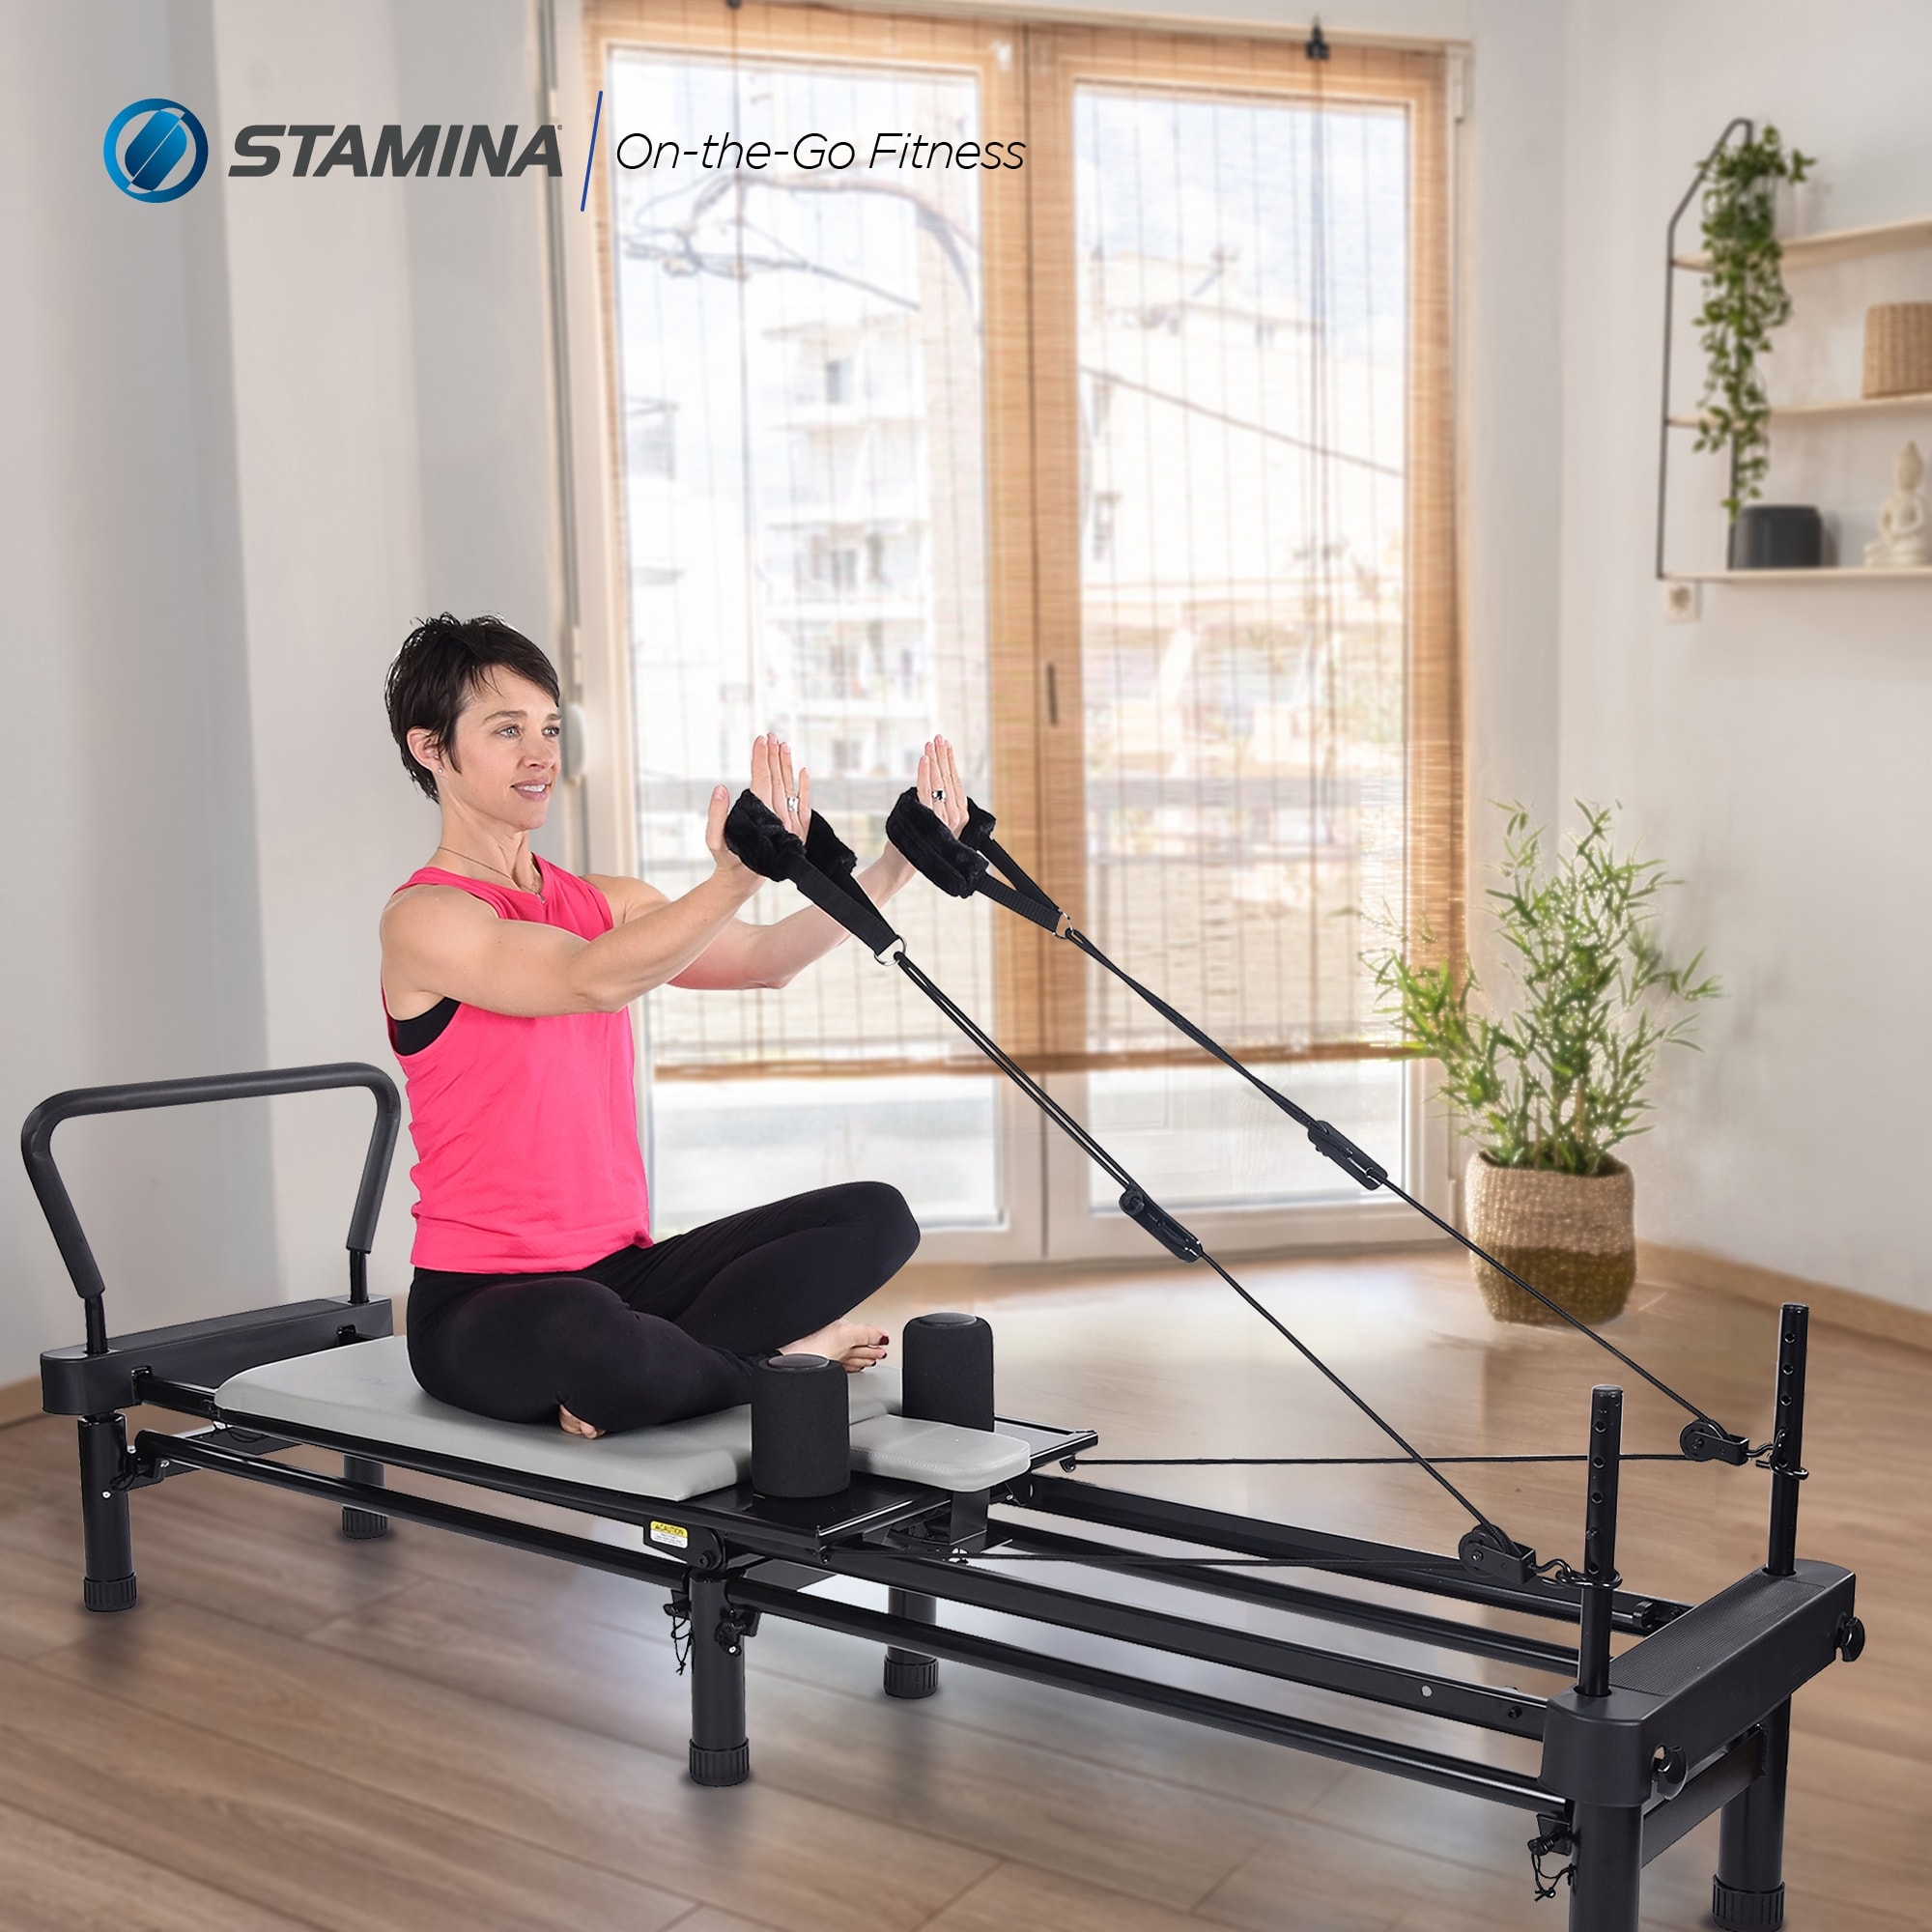 Stamina Products AeroPilates Reformer 651 Whole Body Resistance Workout  Machine for Home Gym with 10 Inch Stand and Foldable Frame with Wheels